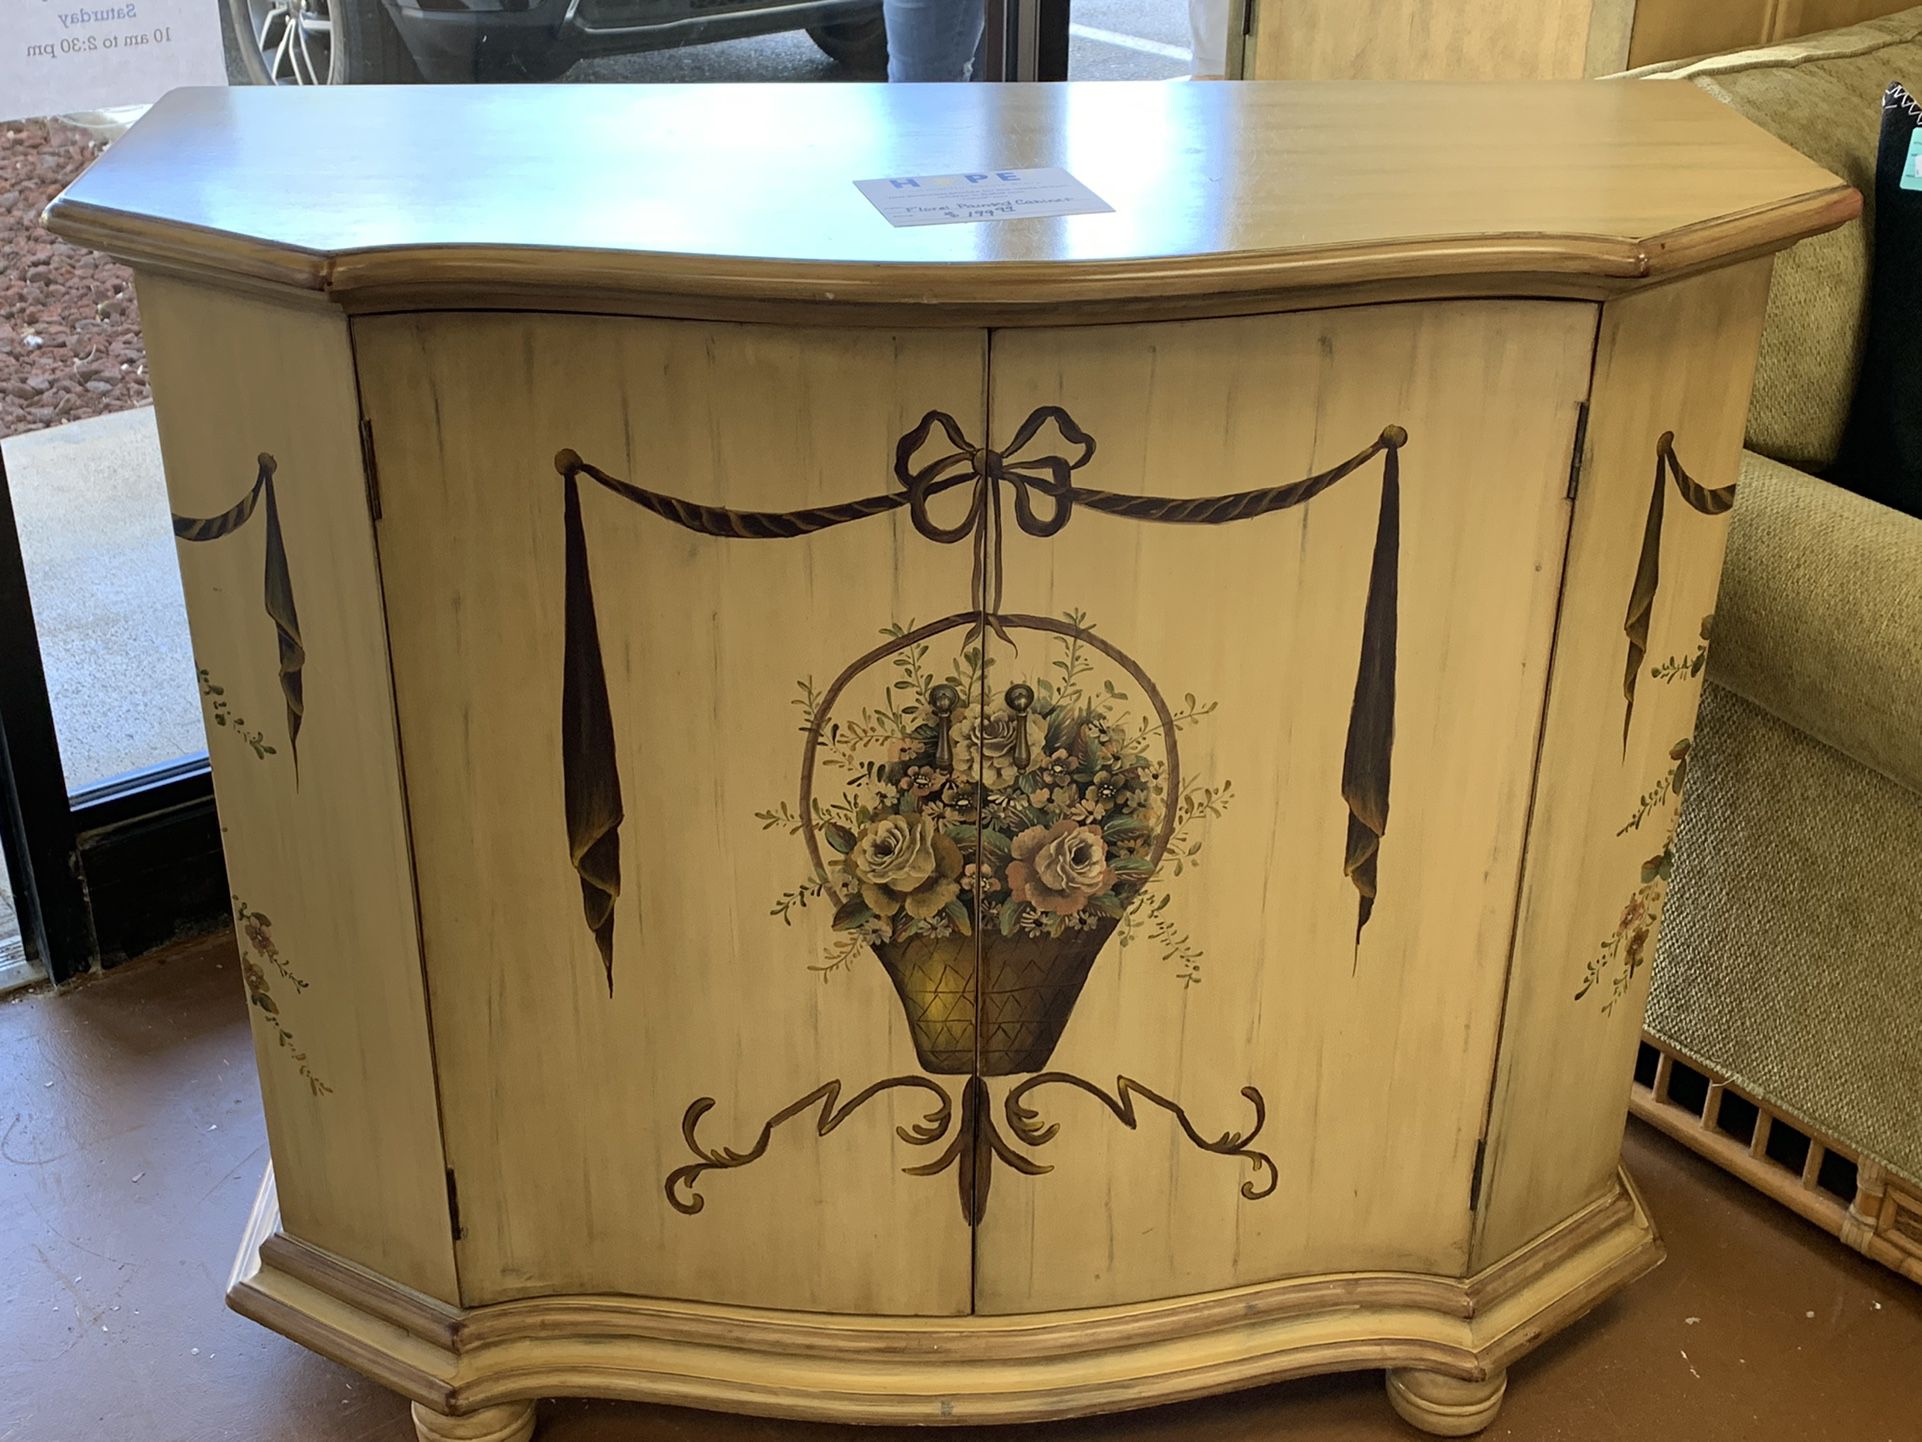 Floral Painted Cabinet